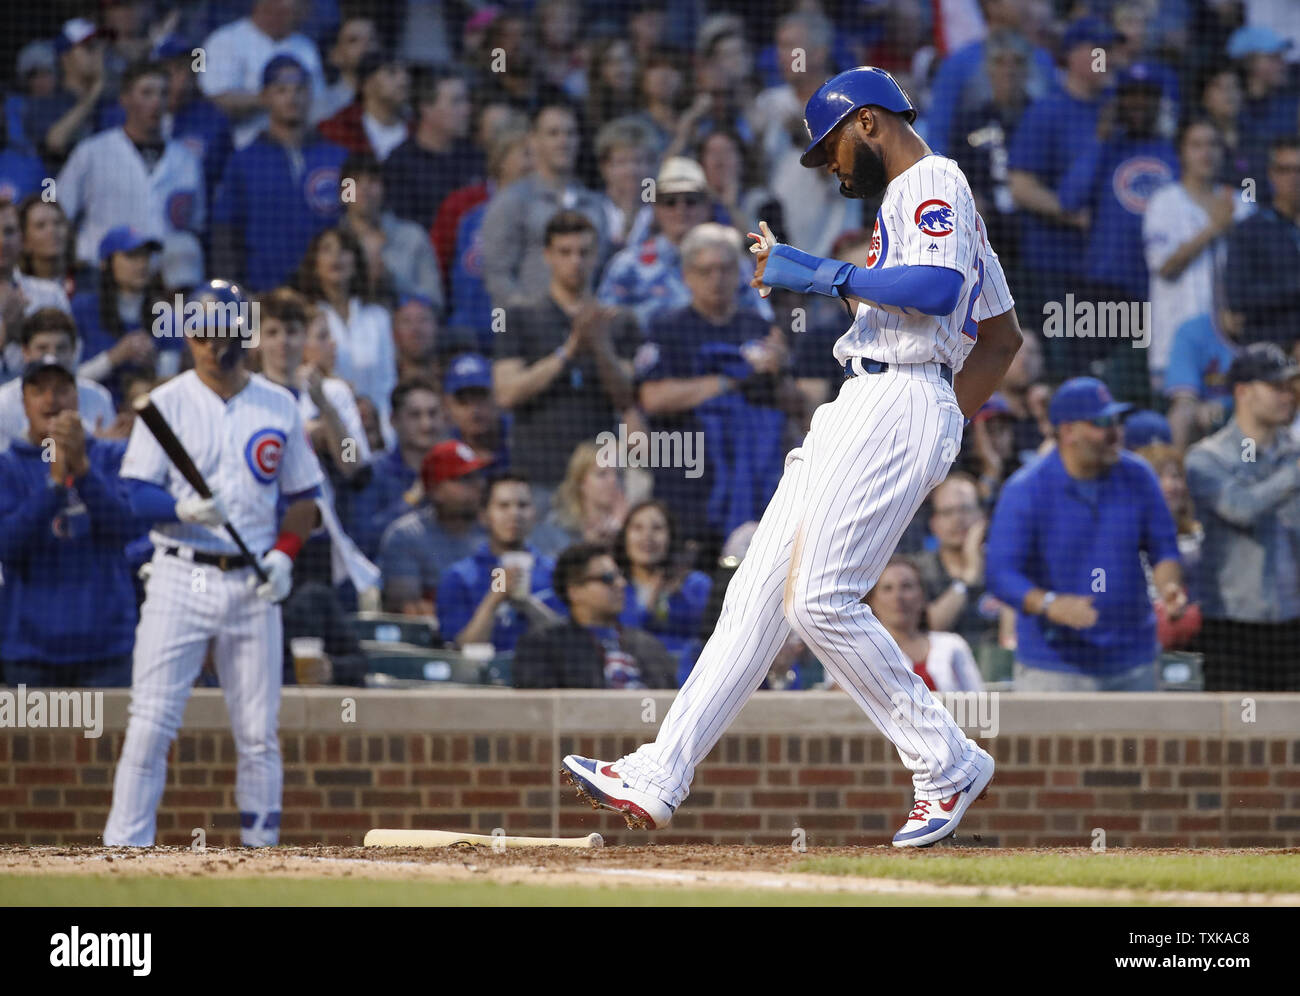 Chicago Cubs' Jason Heyward scores against the St. Louis Cardinals in the fifth inning at Wrigley Field on May 5, 2019 in Chicago. Photo by Kamil Krzaczynski/UPI Stock Photo